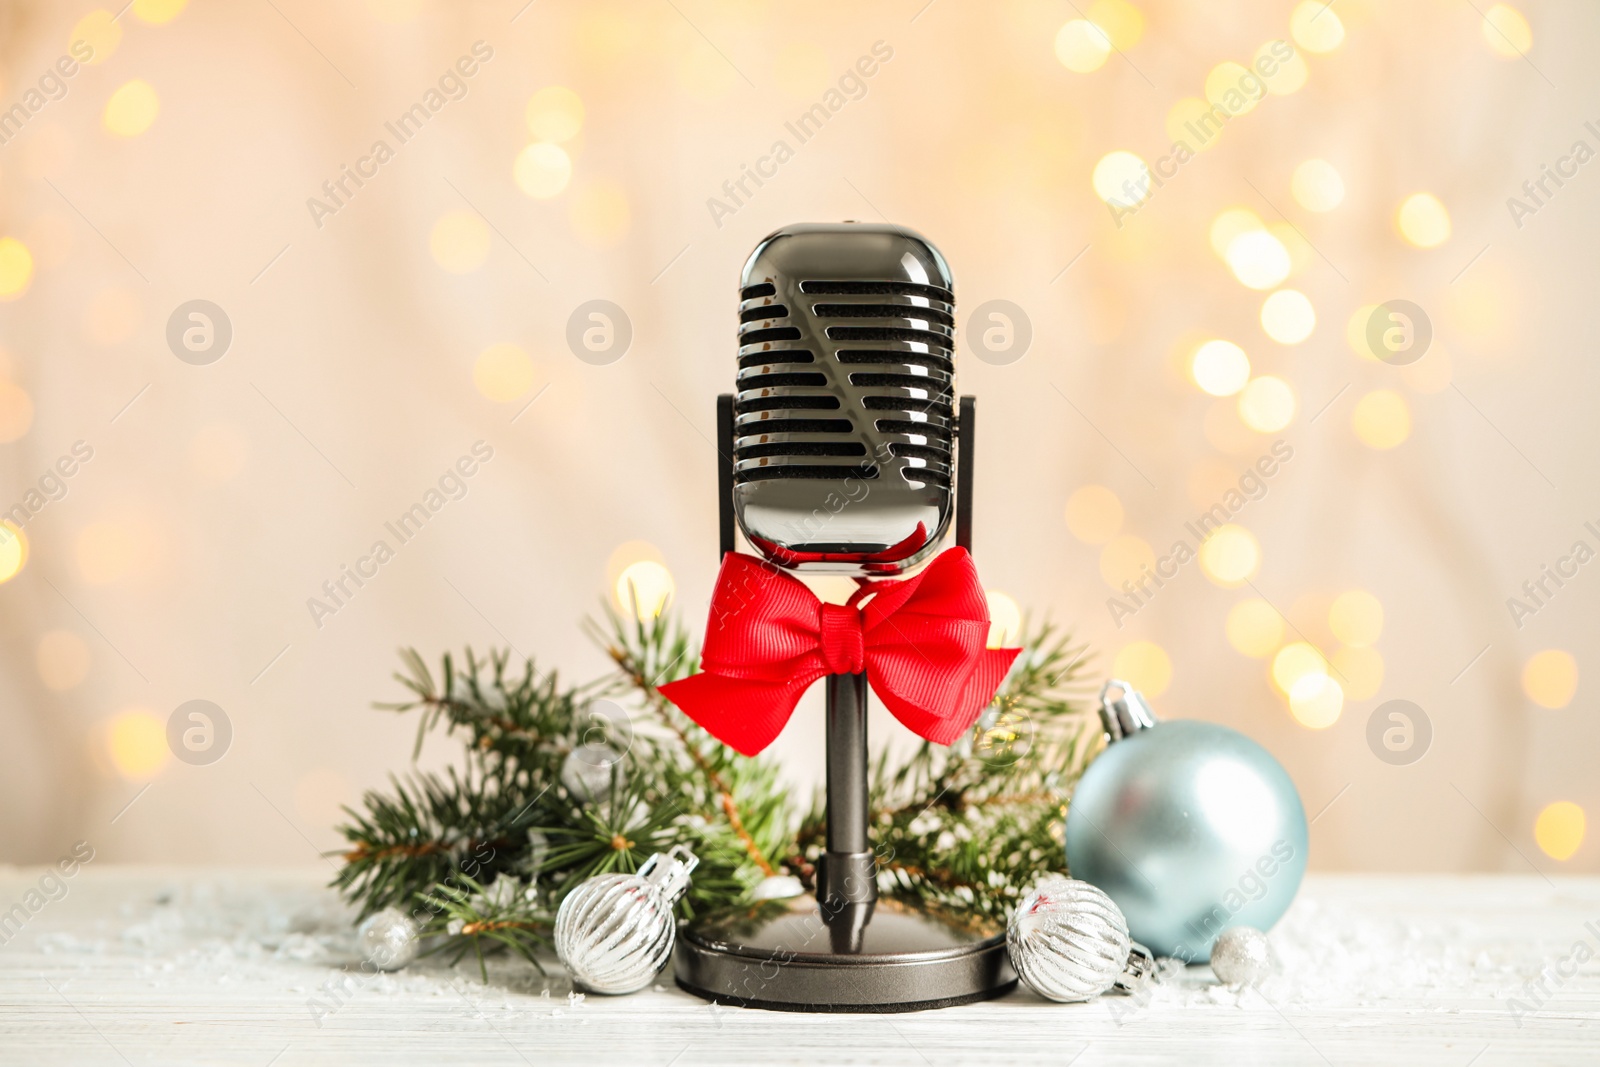 Photo of Microphone with red bow and decorations on white table against blurred lights. Christmas music